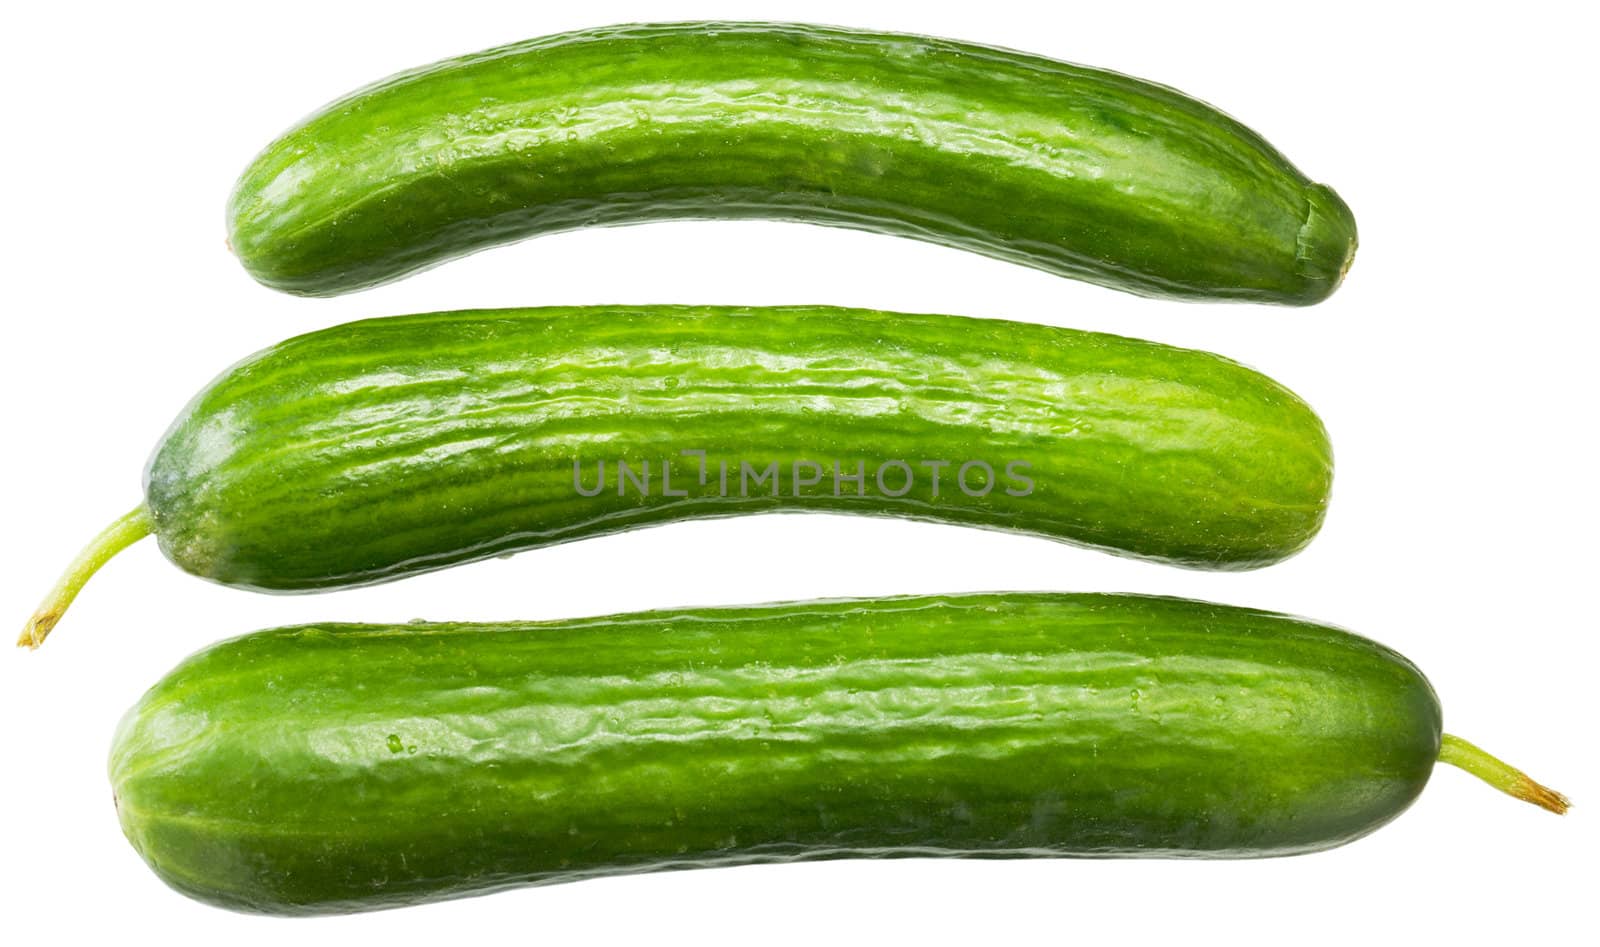 Three green cucumbers on a white background